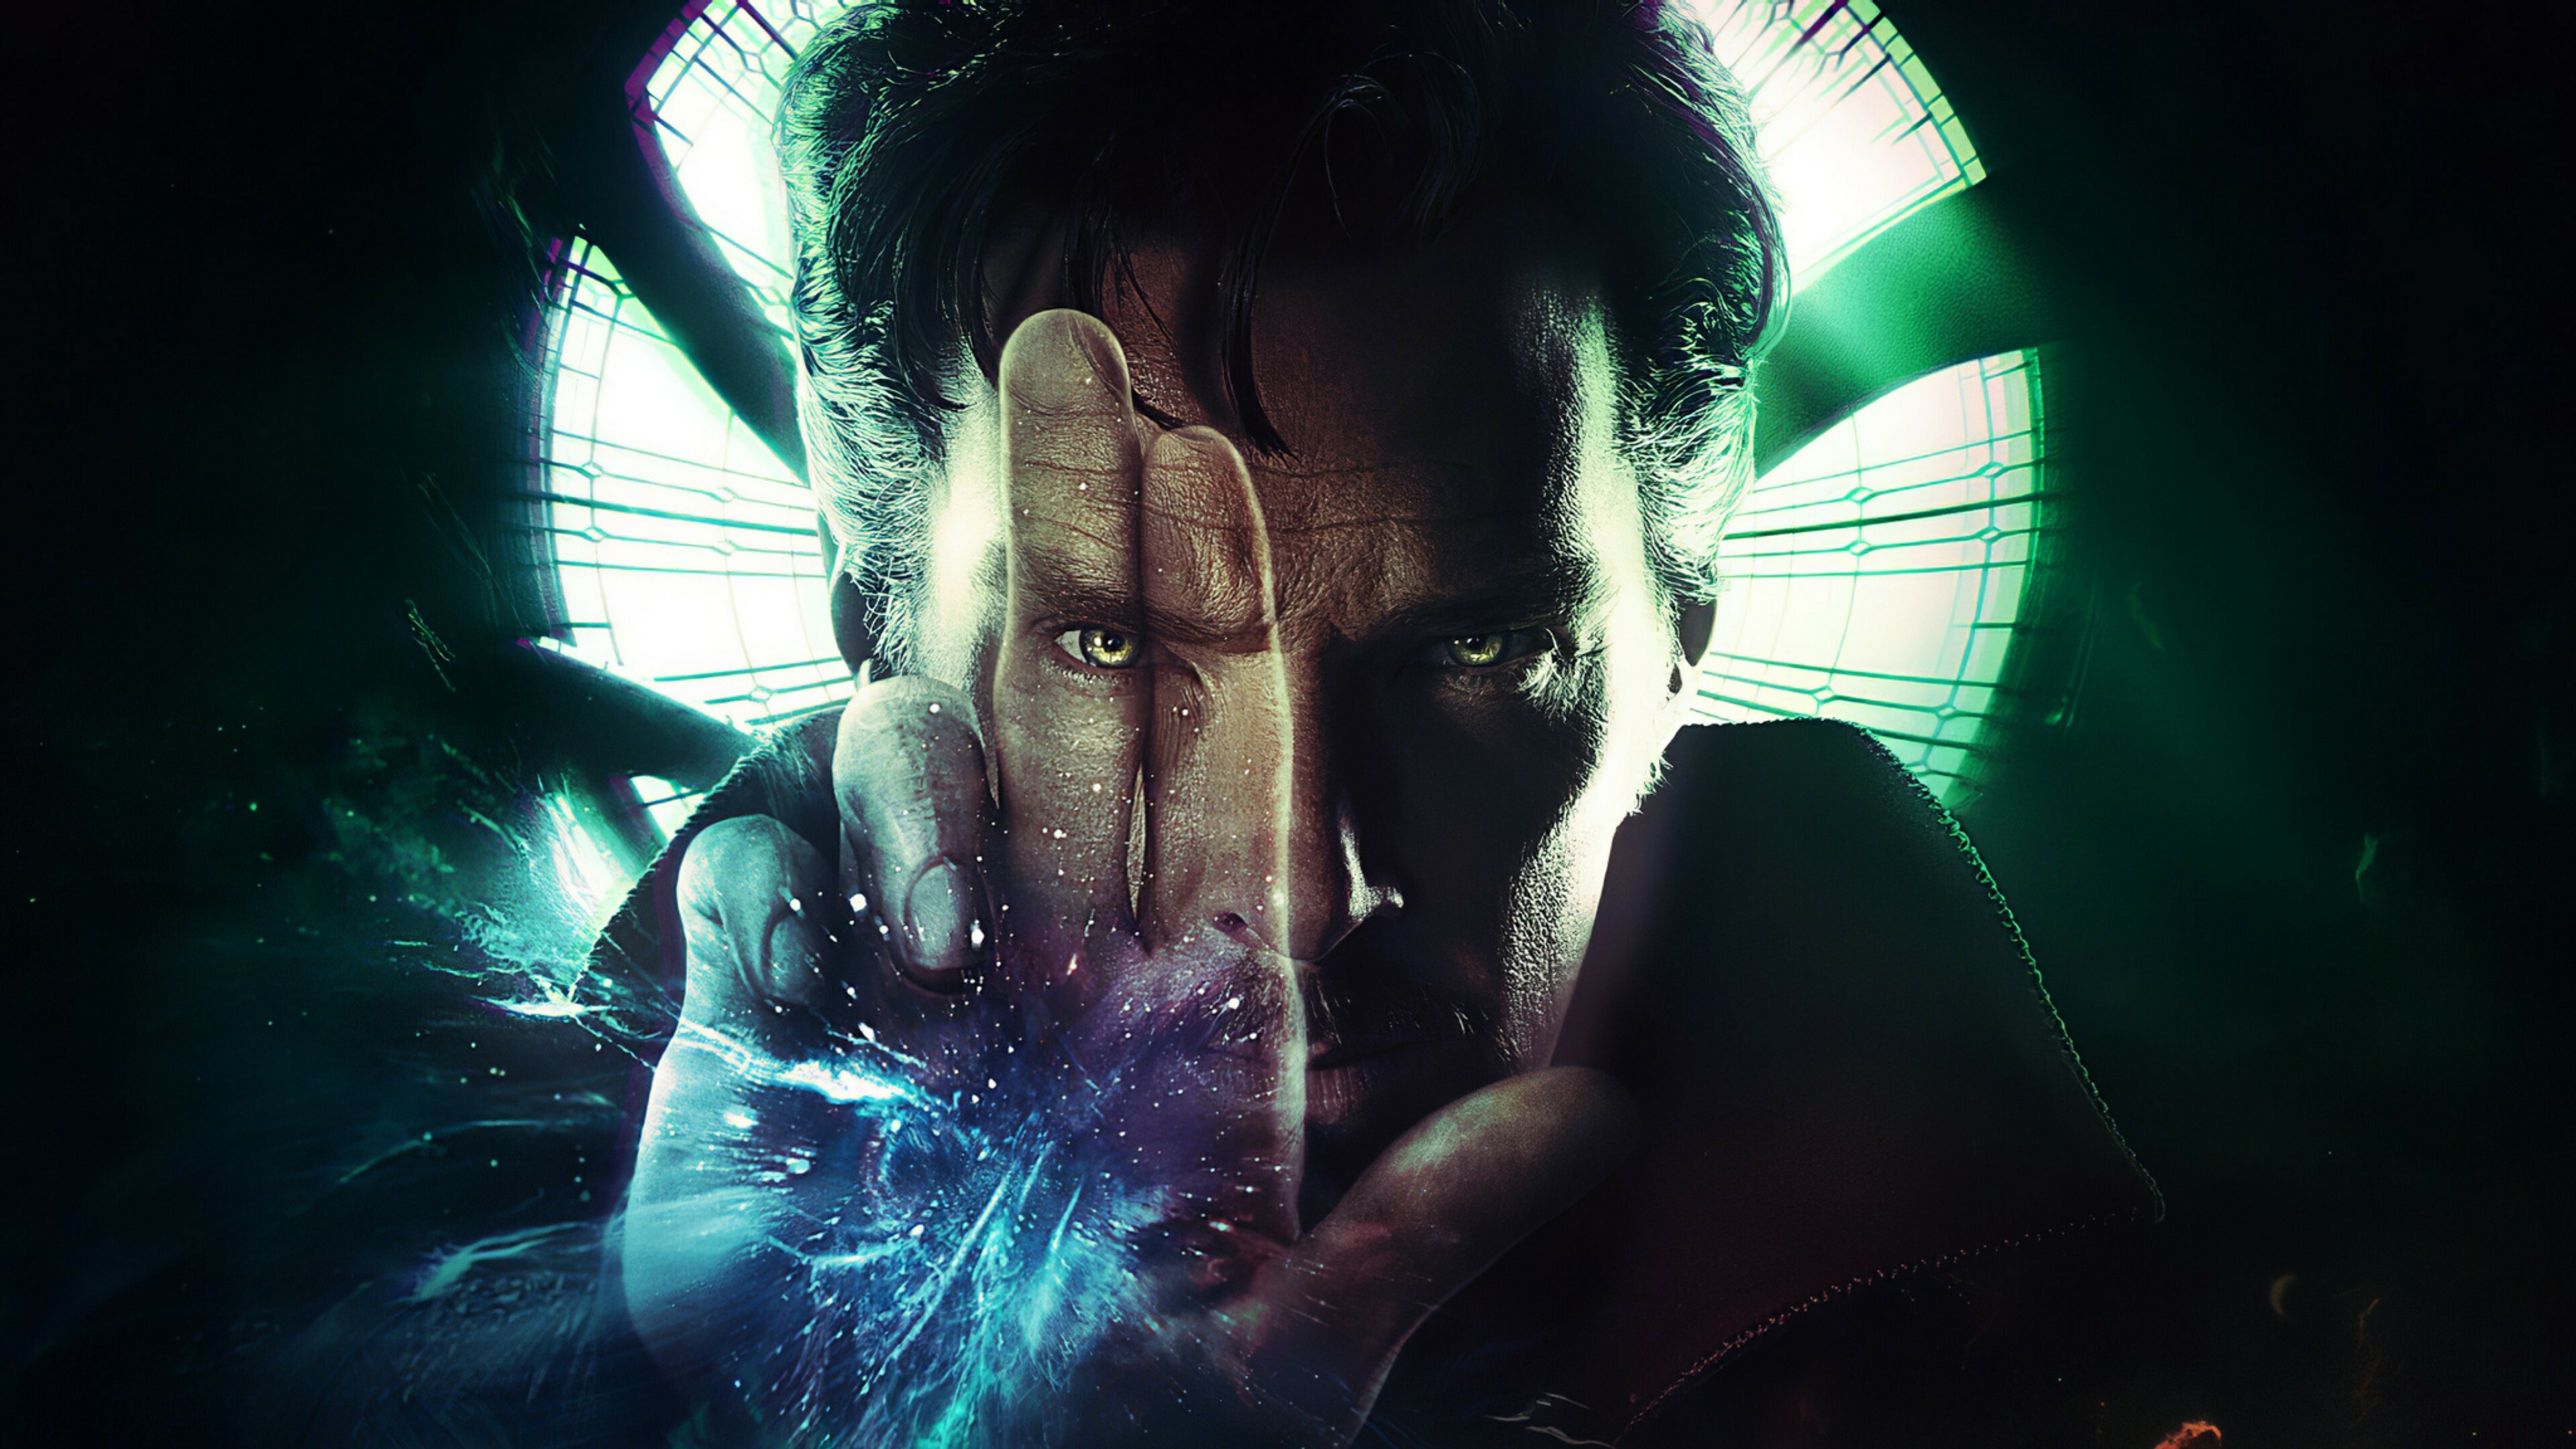 Download 3840x2160 doctor strange in the multiverse of madness, fantasy marvel movie, 2022 4k wallpaper, uhd wallpaper, 16:9 widescreen wallpaper, 3840x2160 hd image, background, 27573